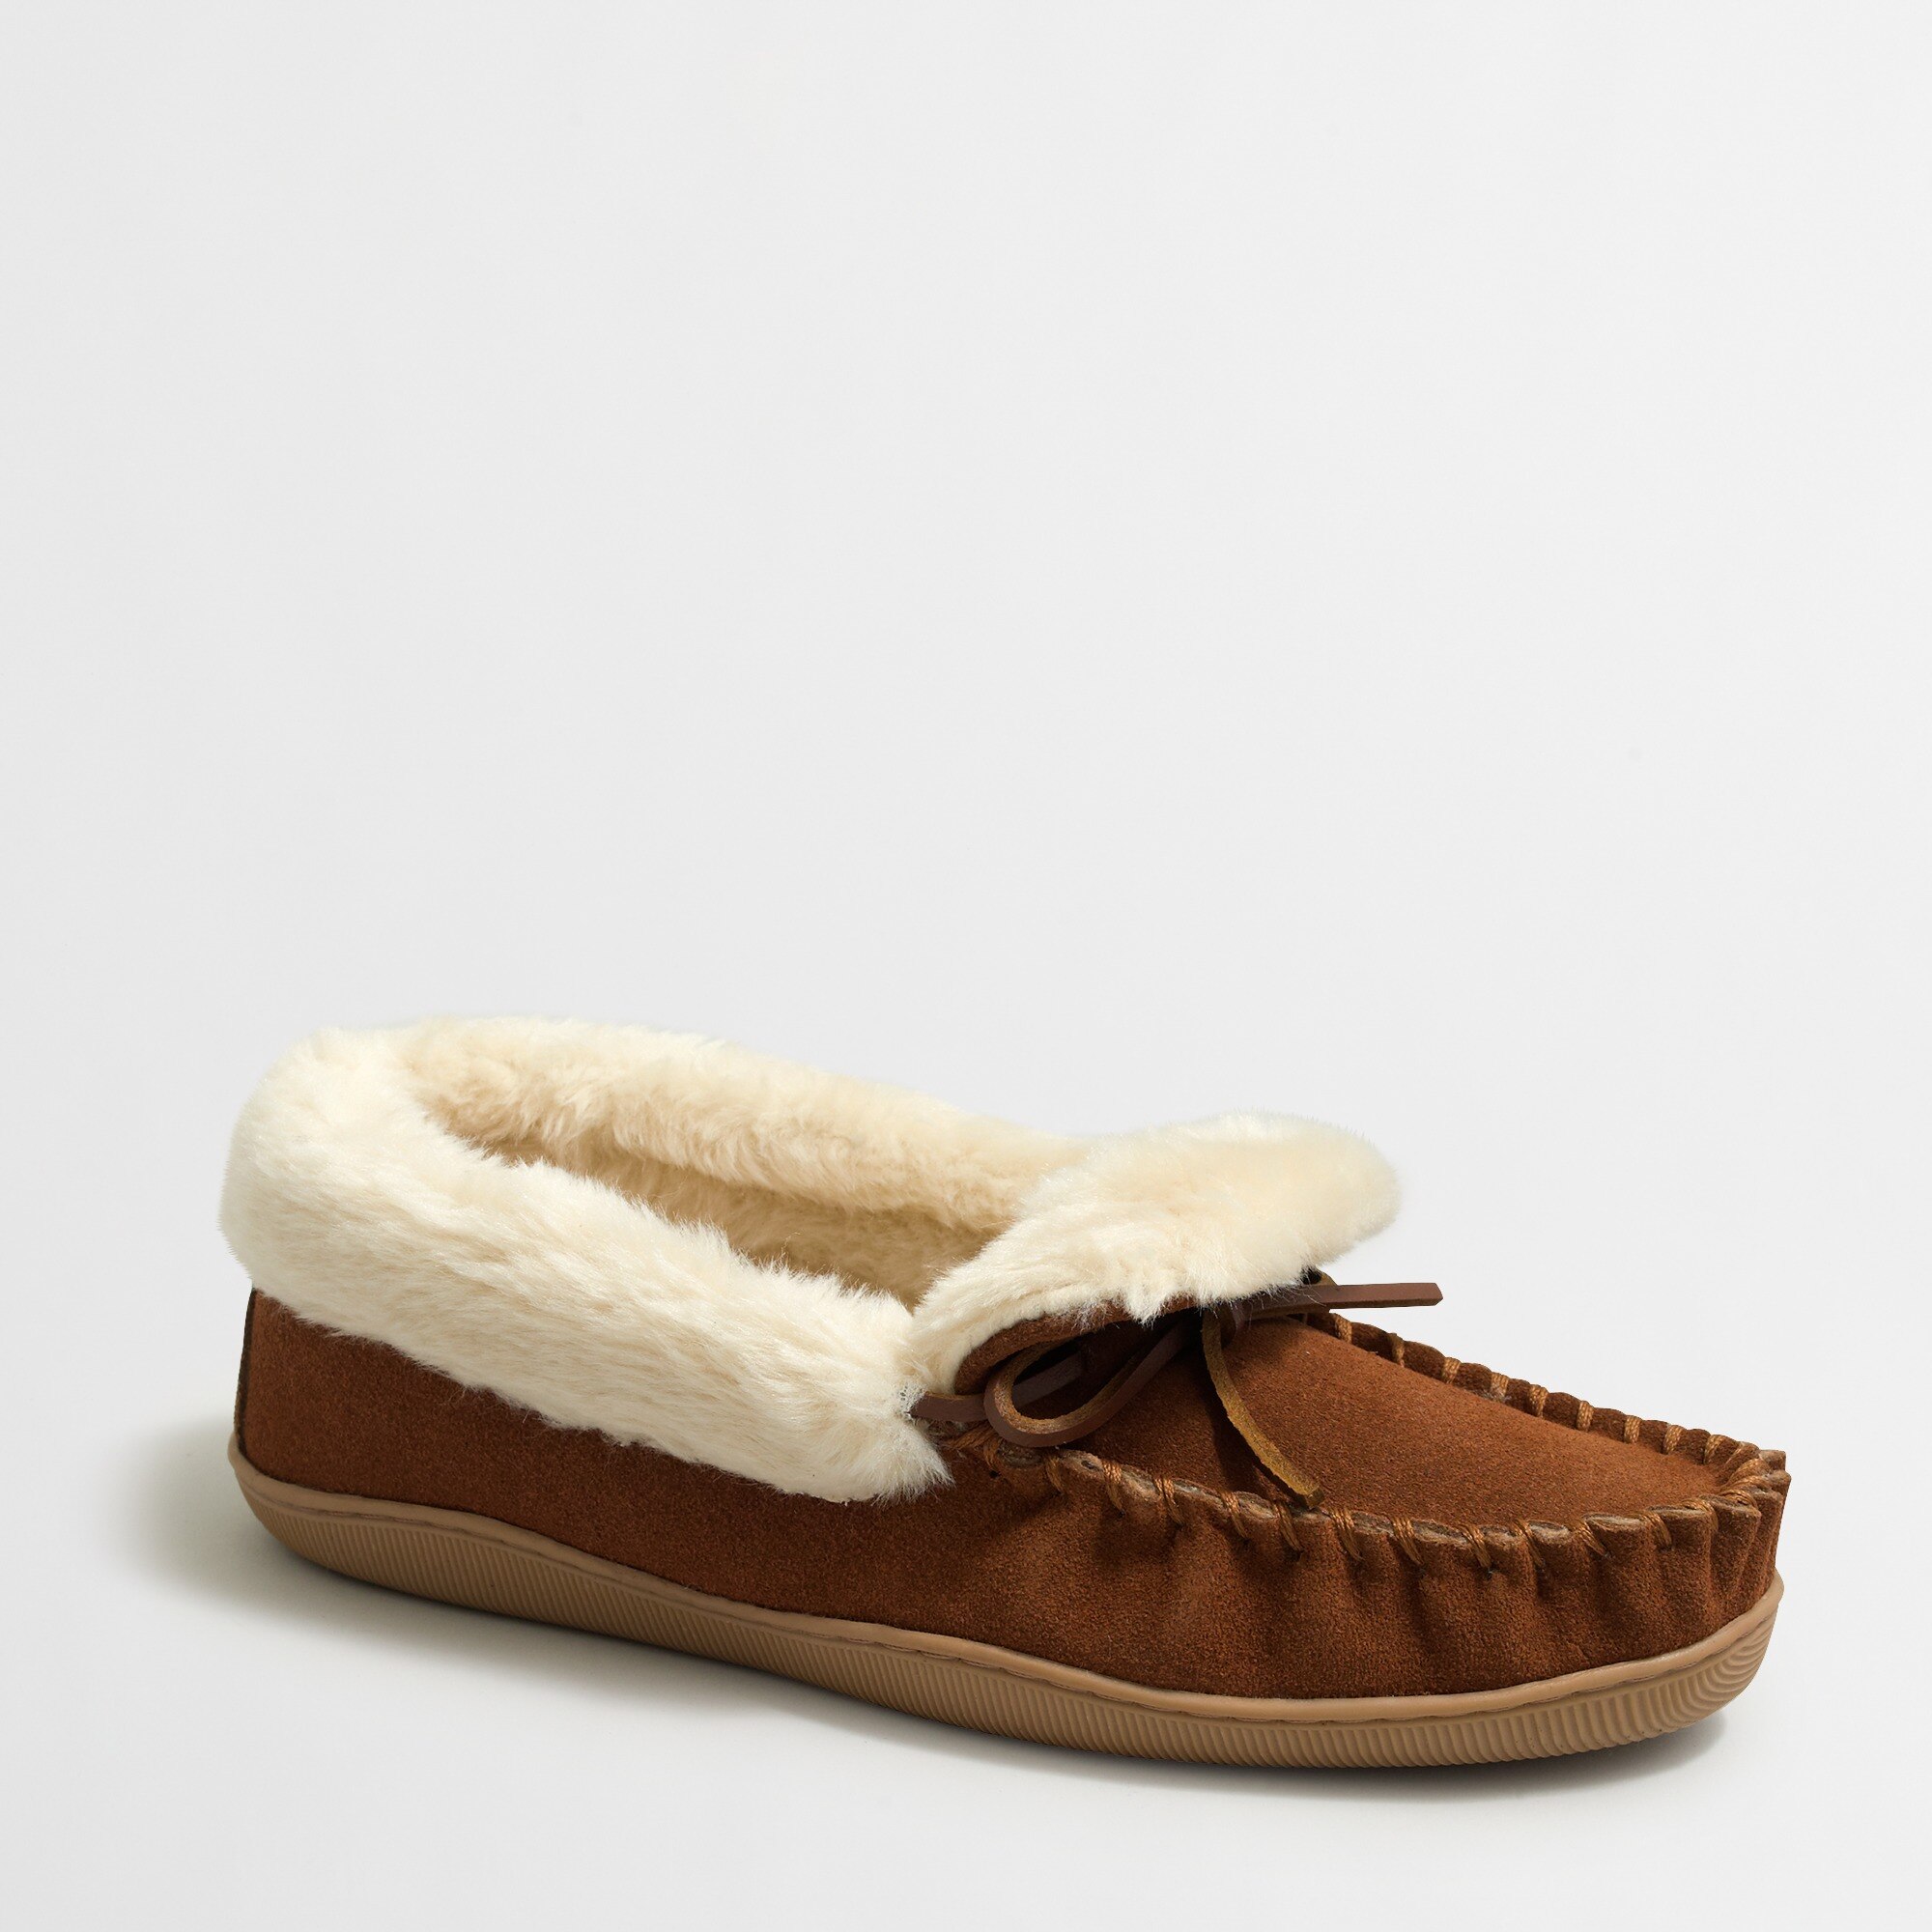 Shearling foldover slippers : FactoryWomen Slippers | Factory